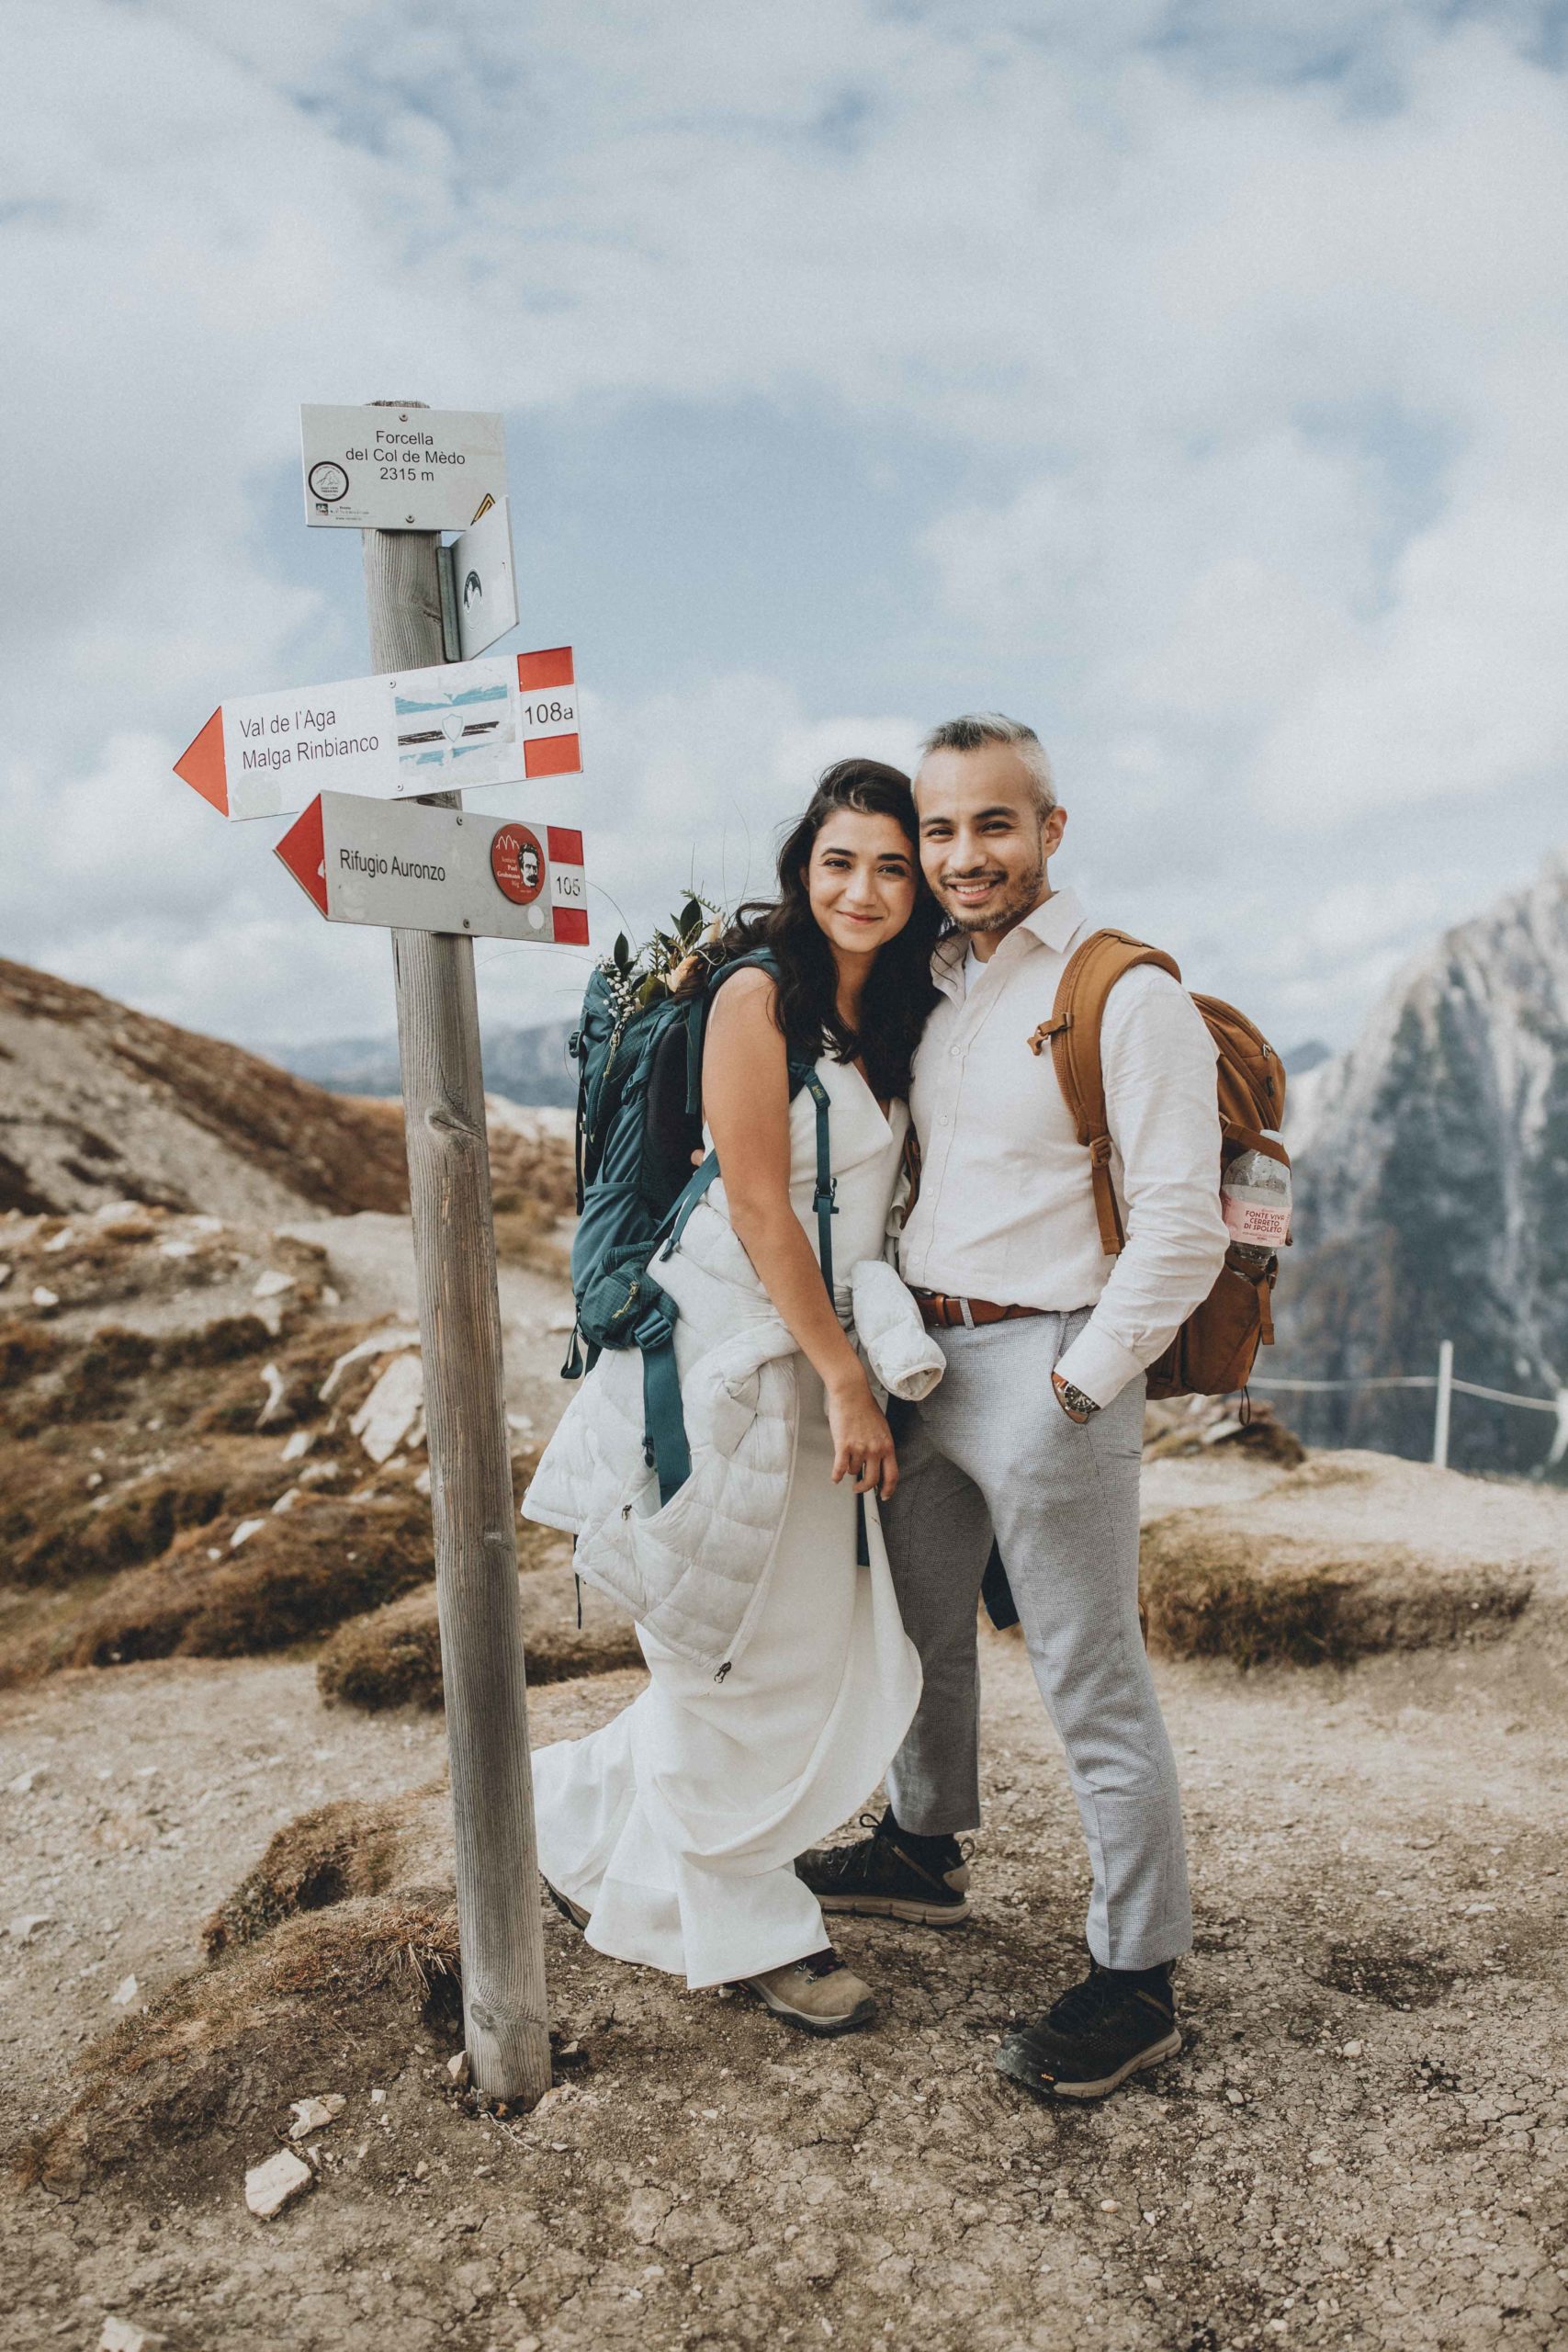 This is an image of a couple eloping in the dolomites. They are standing in their wedding outfits next to a trail sign, smiling at the camera. They are wearing backpacks and hiking boots over their wedding outfits. 